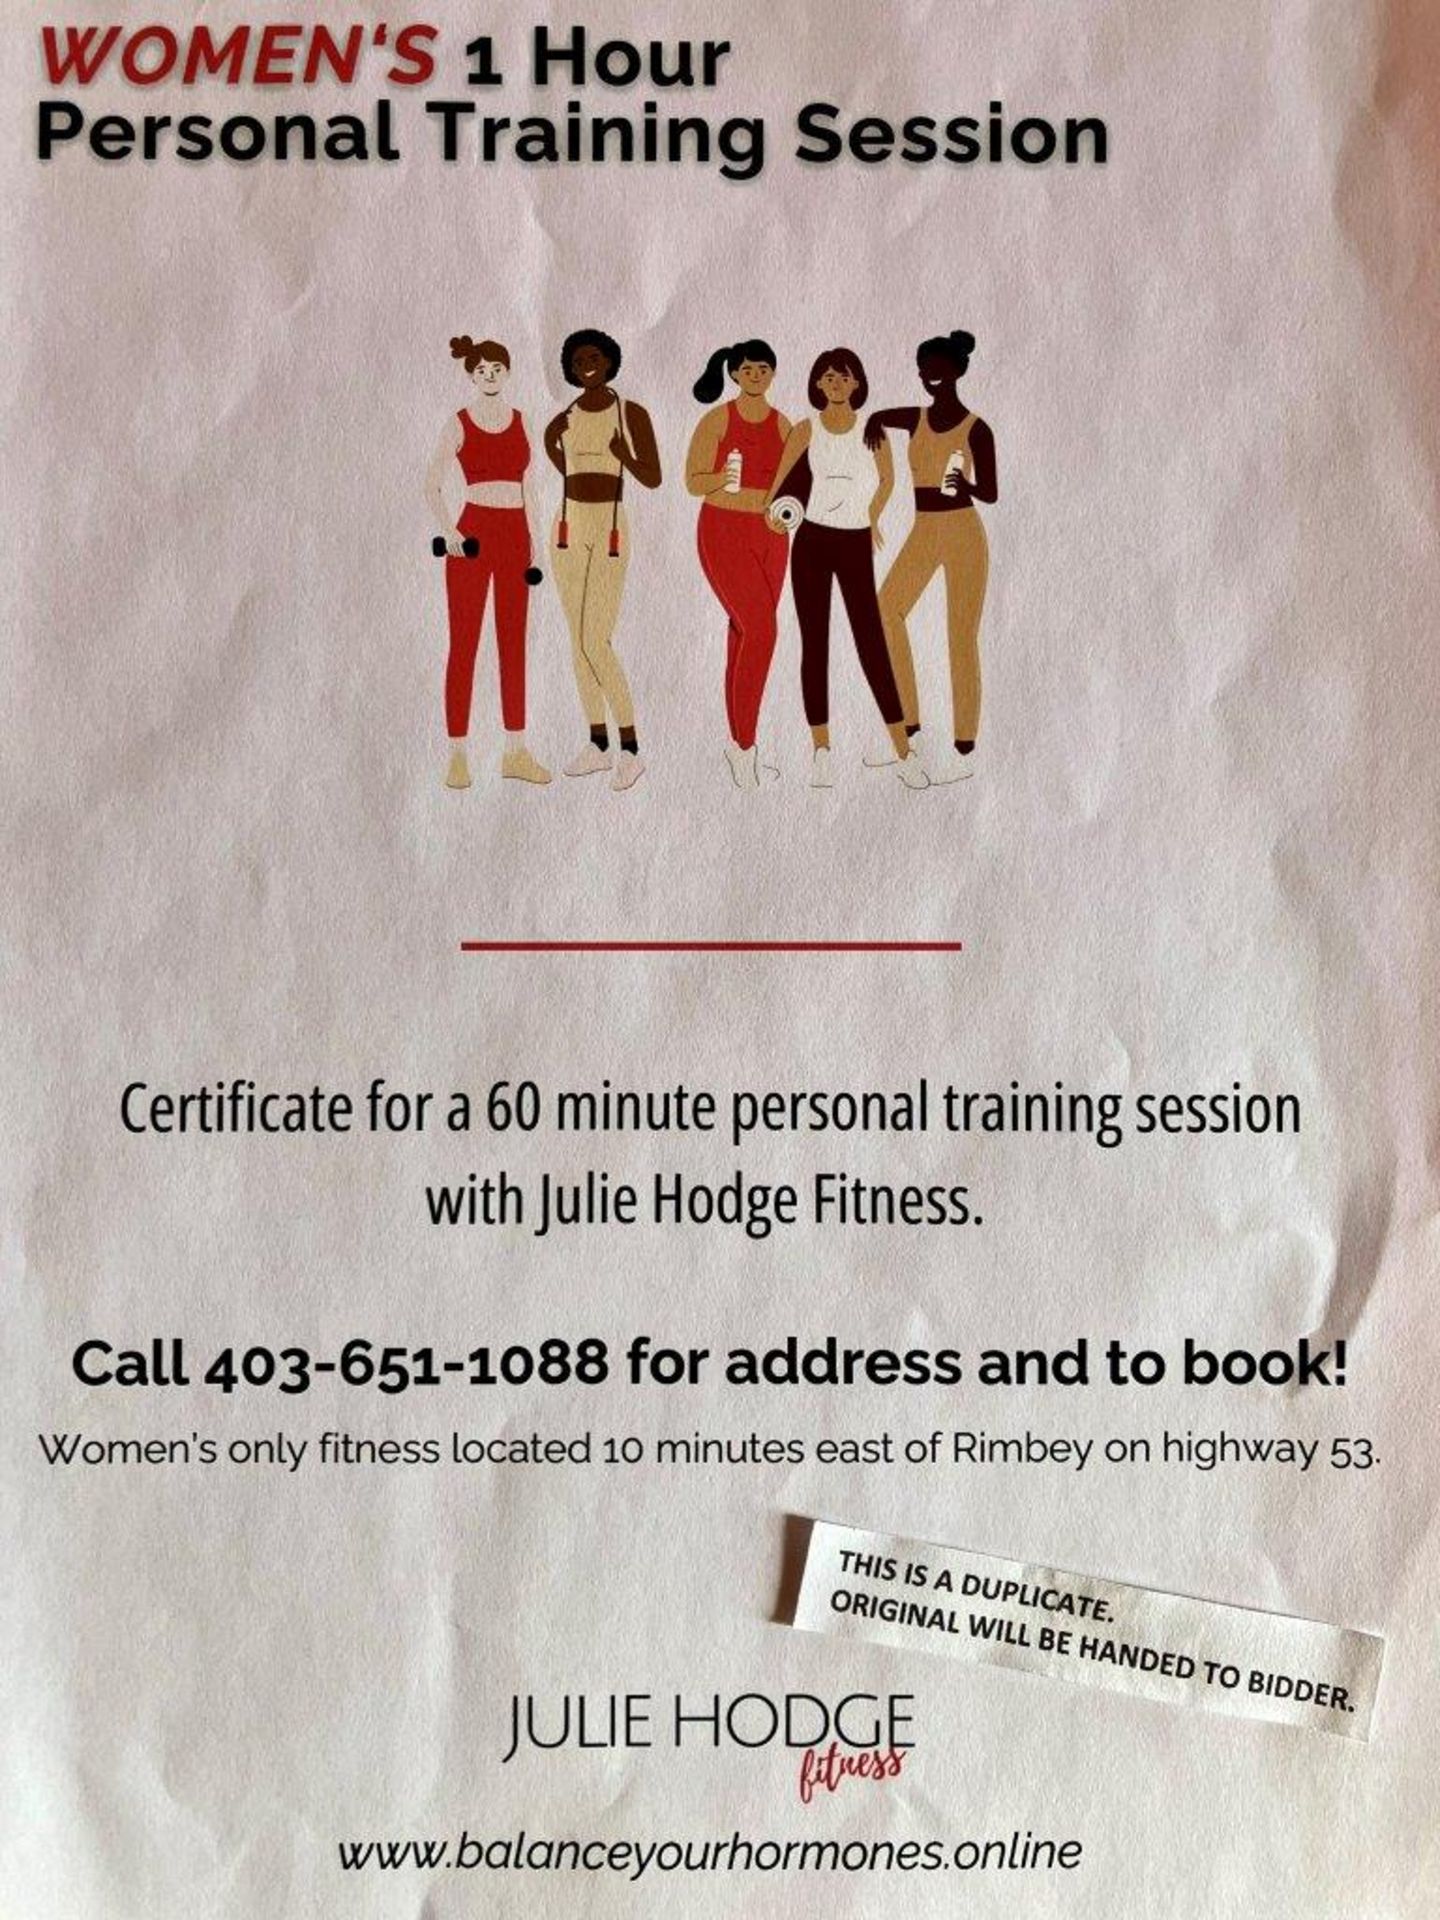 JULIE HODGE FITNESS WOMEN'S 60 MINUTE PERSONAL TRAINING GIFT CERTIFICATE - Image 2 of 2